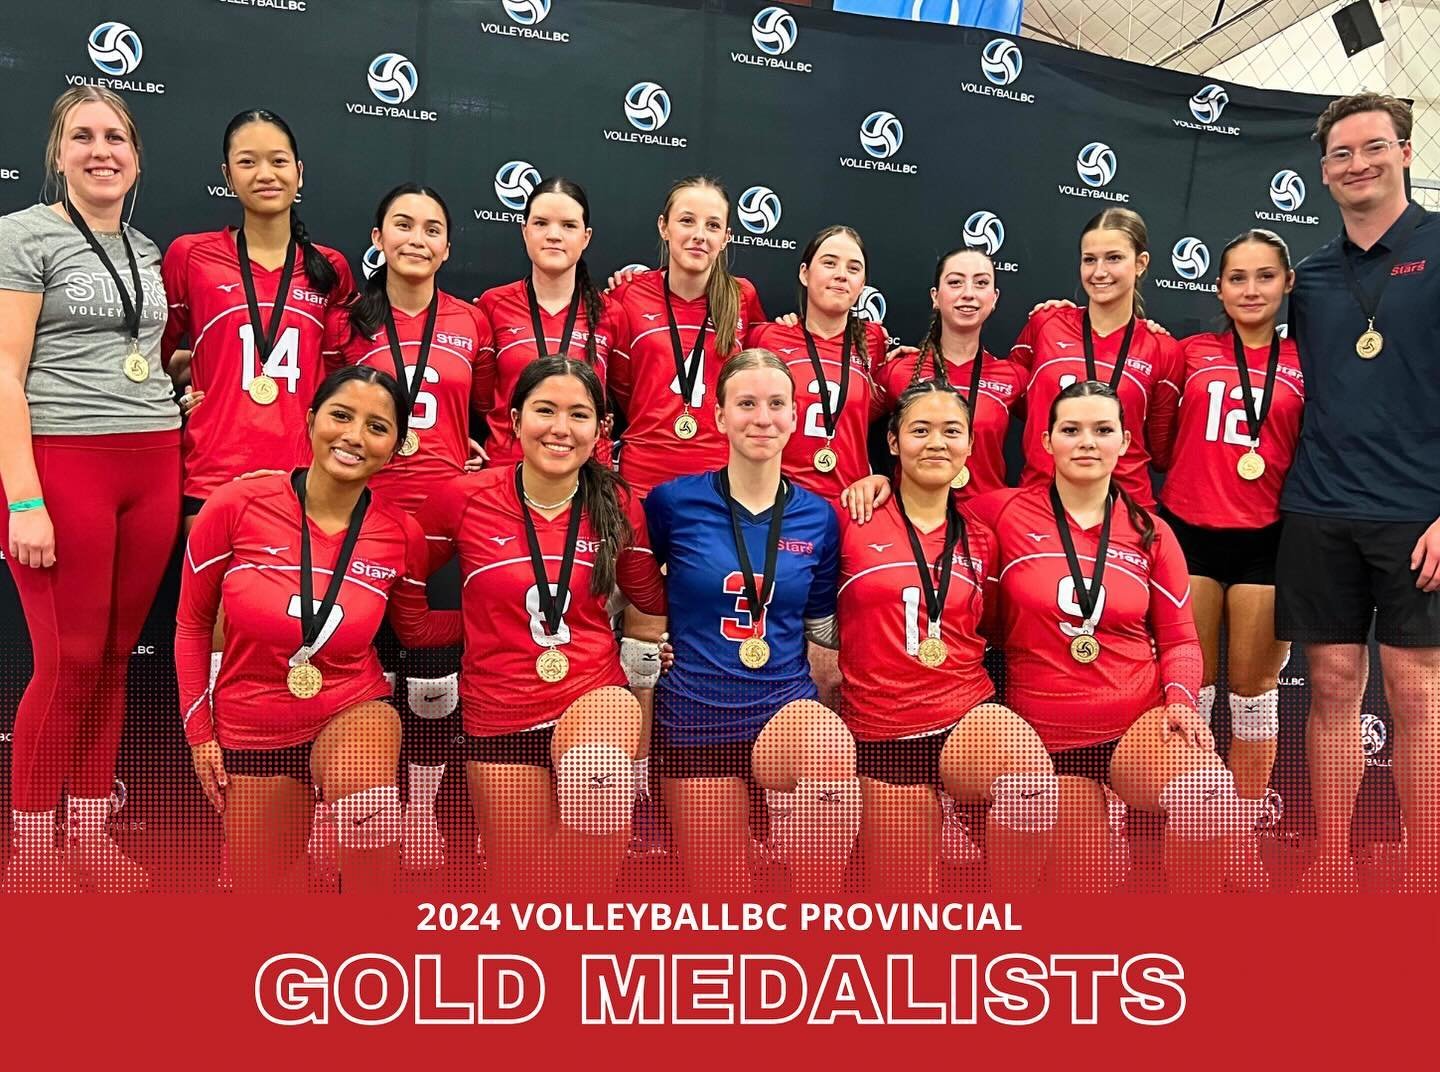 Huge congratulations to our U16 team who fought hard yesterday and won the gold medal in their division at @volleyballbc Provincials!

This team was able to come together and battle to win some tight 3-set matches. The energy of this group is contagi